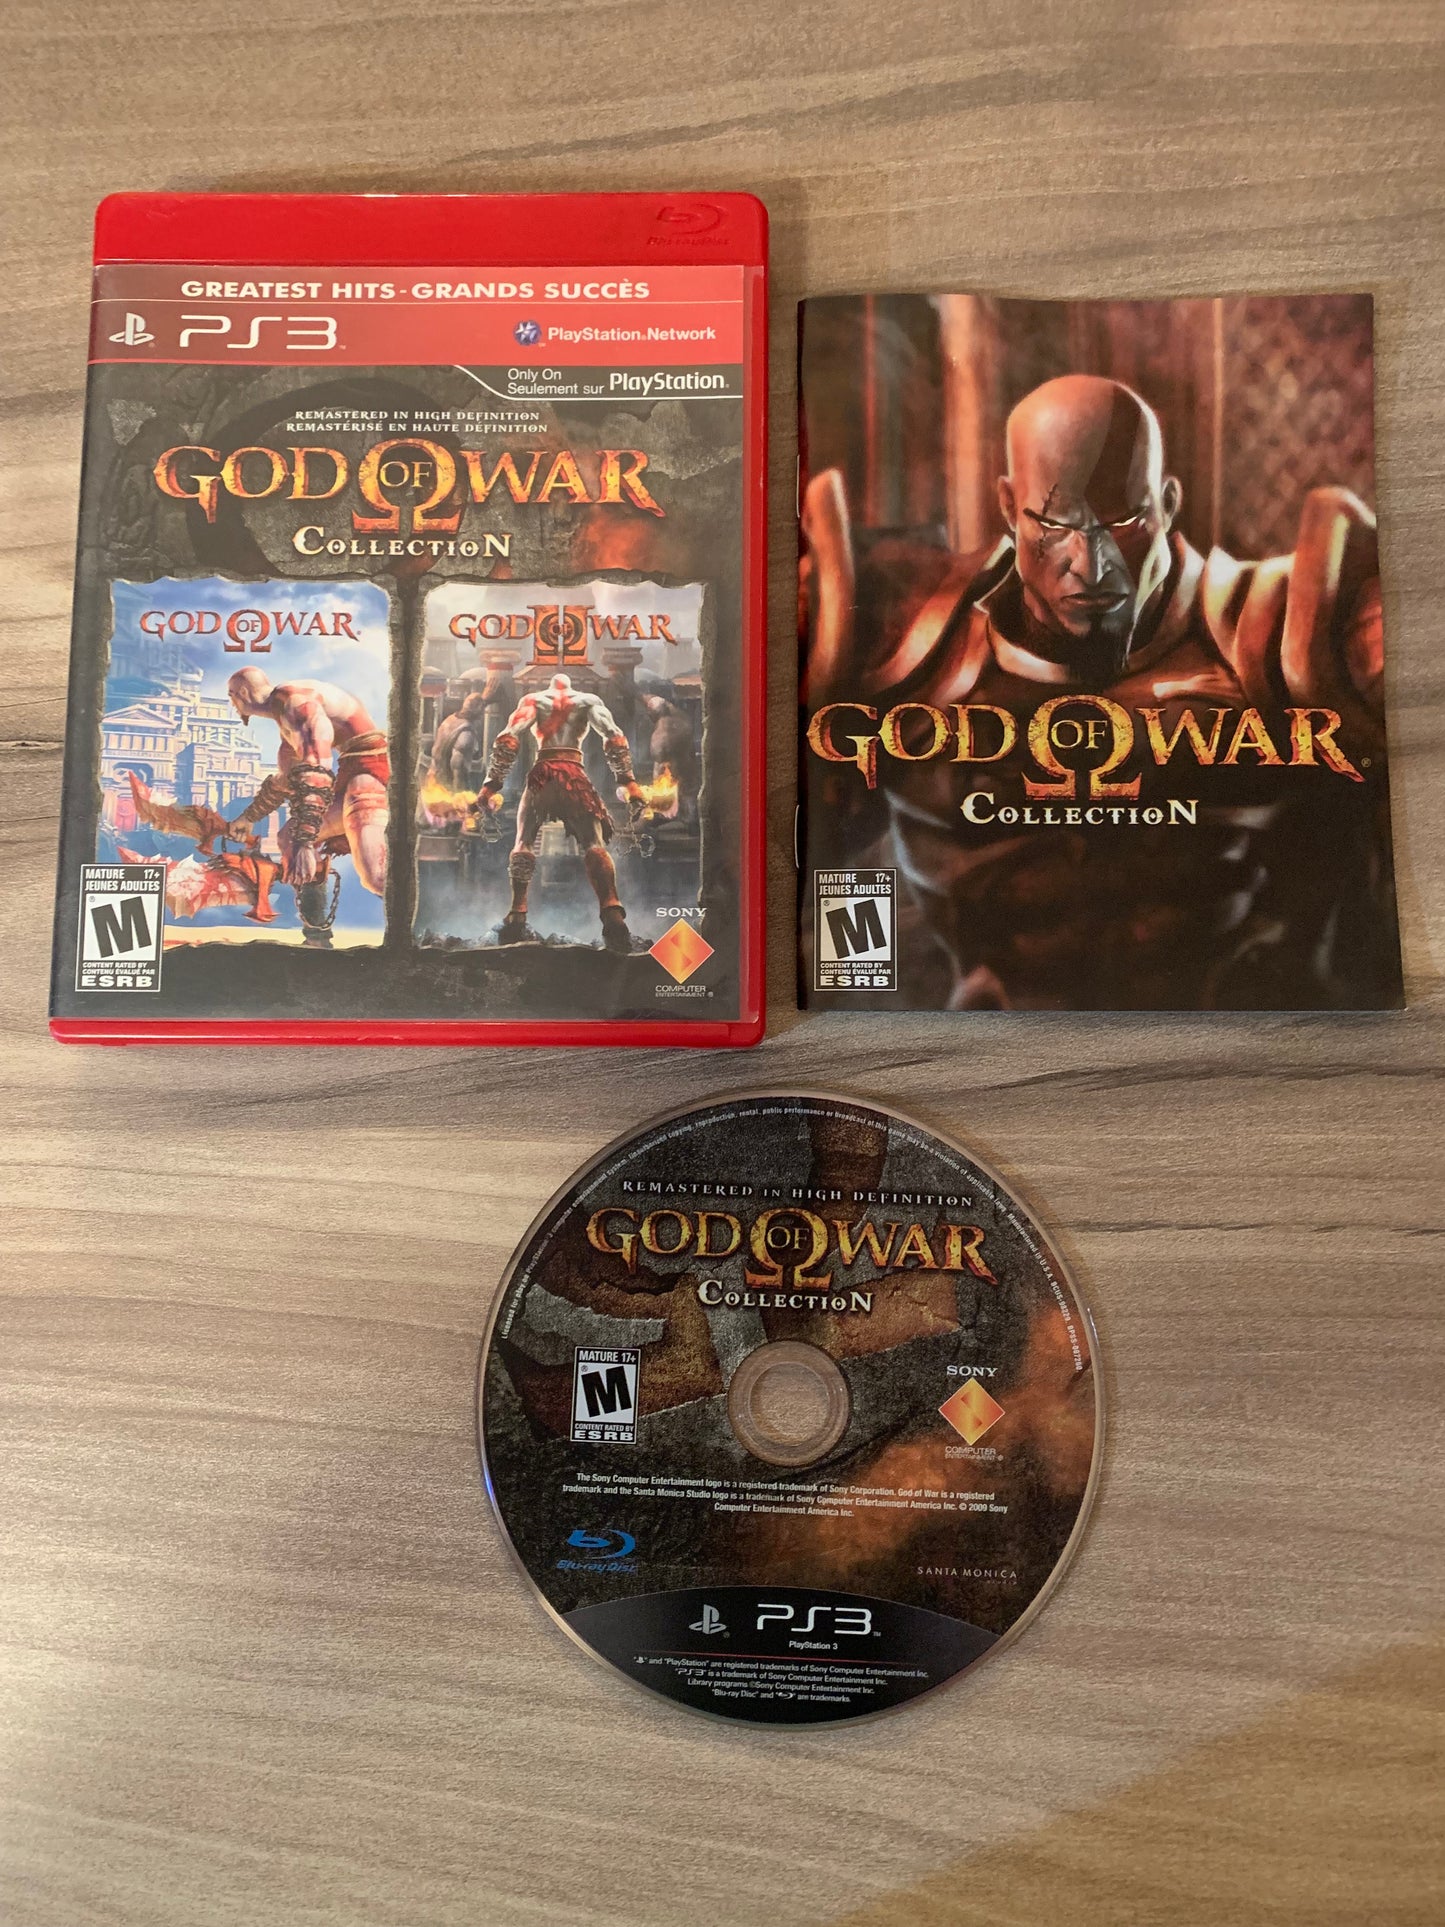 PiXEL-RETRO.COM : SONY PLAYSTATION 3 (PS3) COMPLET CIB BOX MANUAL GAME NTSC GOD OF WAR COLLECTION